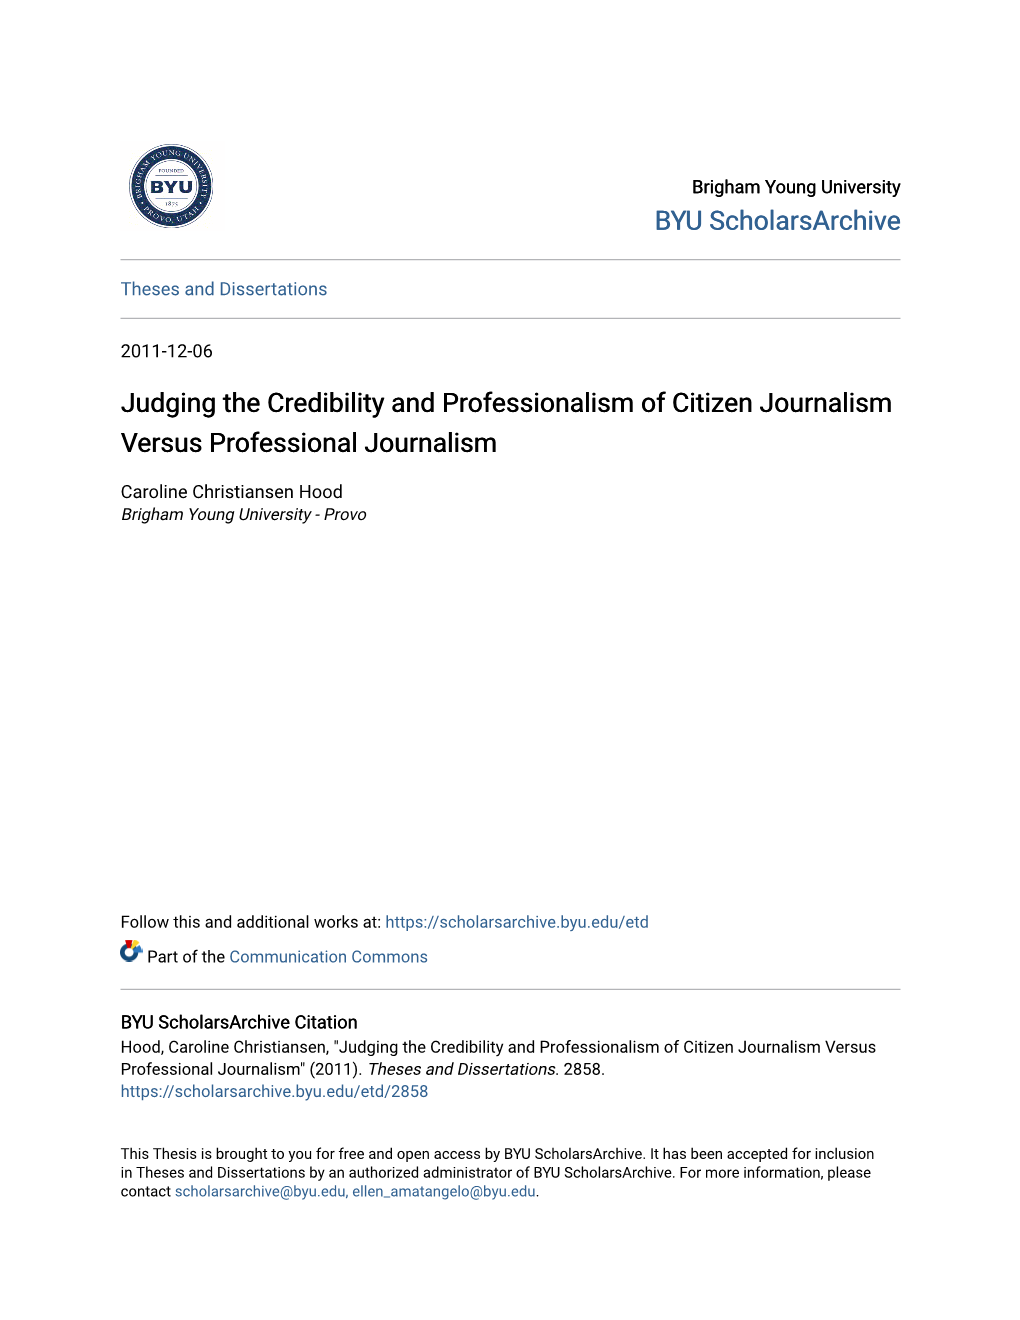 Judging the Credibility and Professionalism of Citizen Journalism Versus Professional Journalism